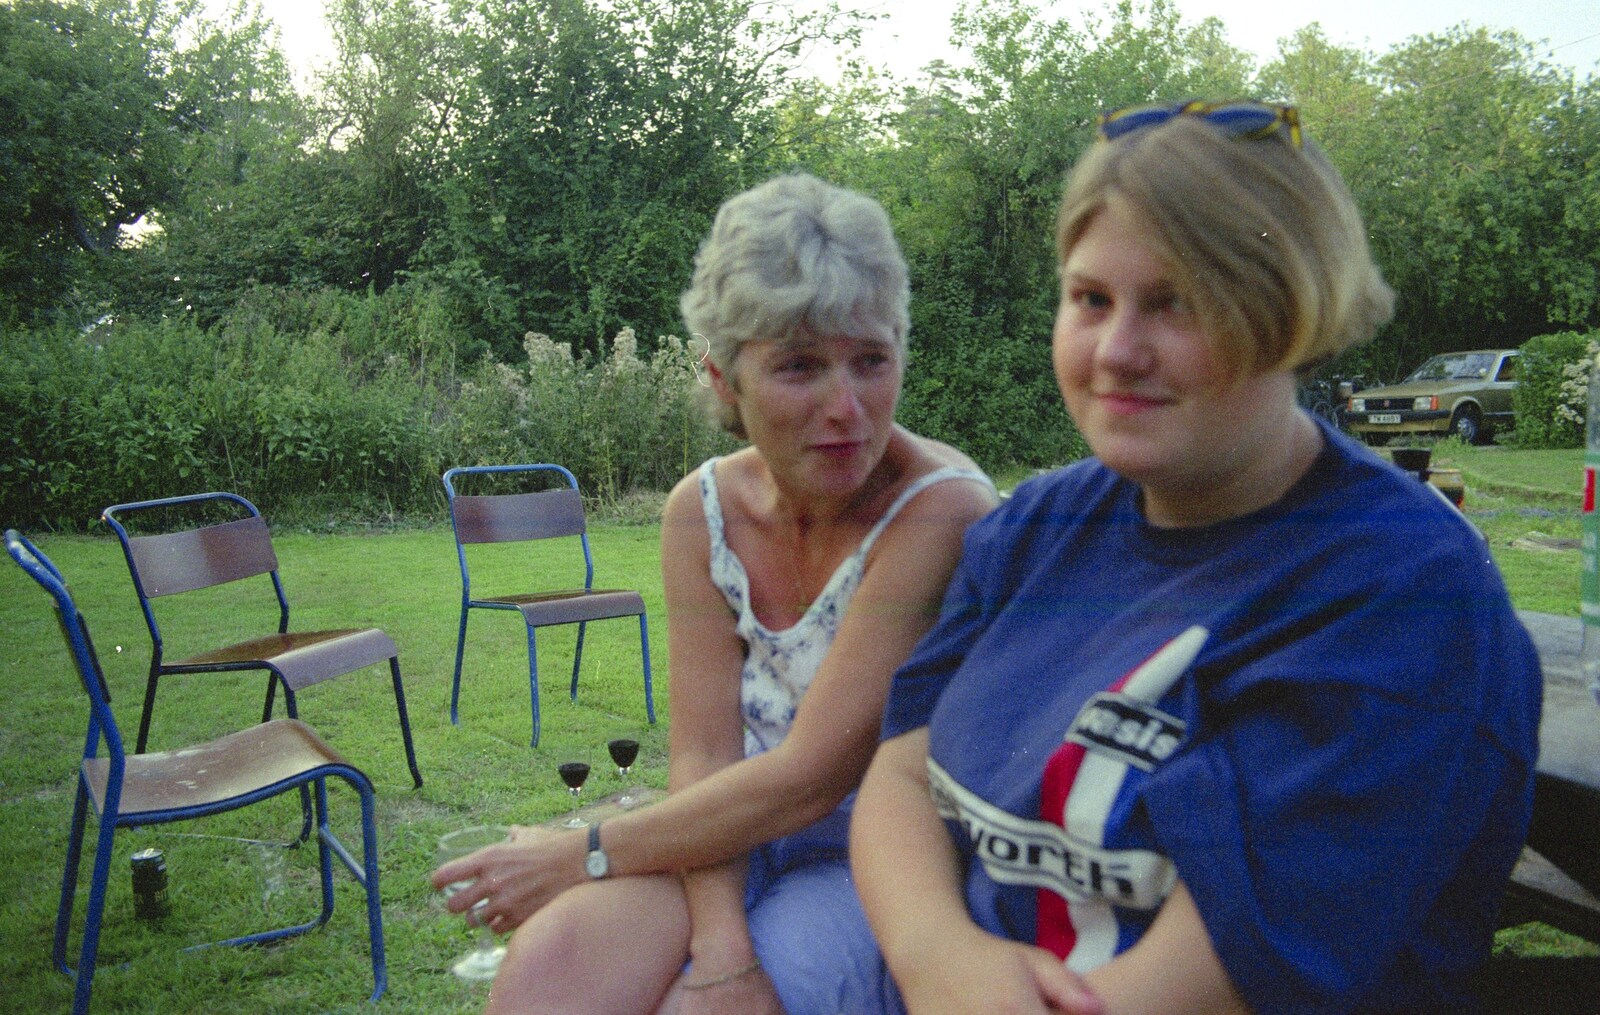 Spammy and Helen from Andrew's CISU Party, and Nosher's Garden Barbeque, Ipswich and Brome, Suffolk - June 10th 1998